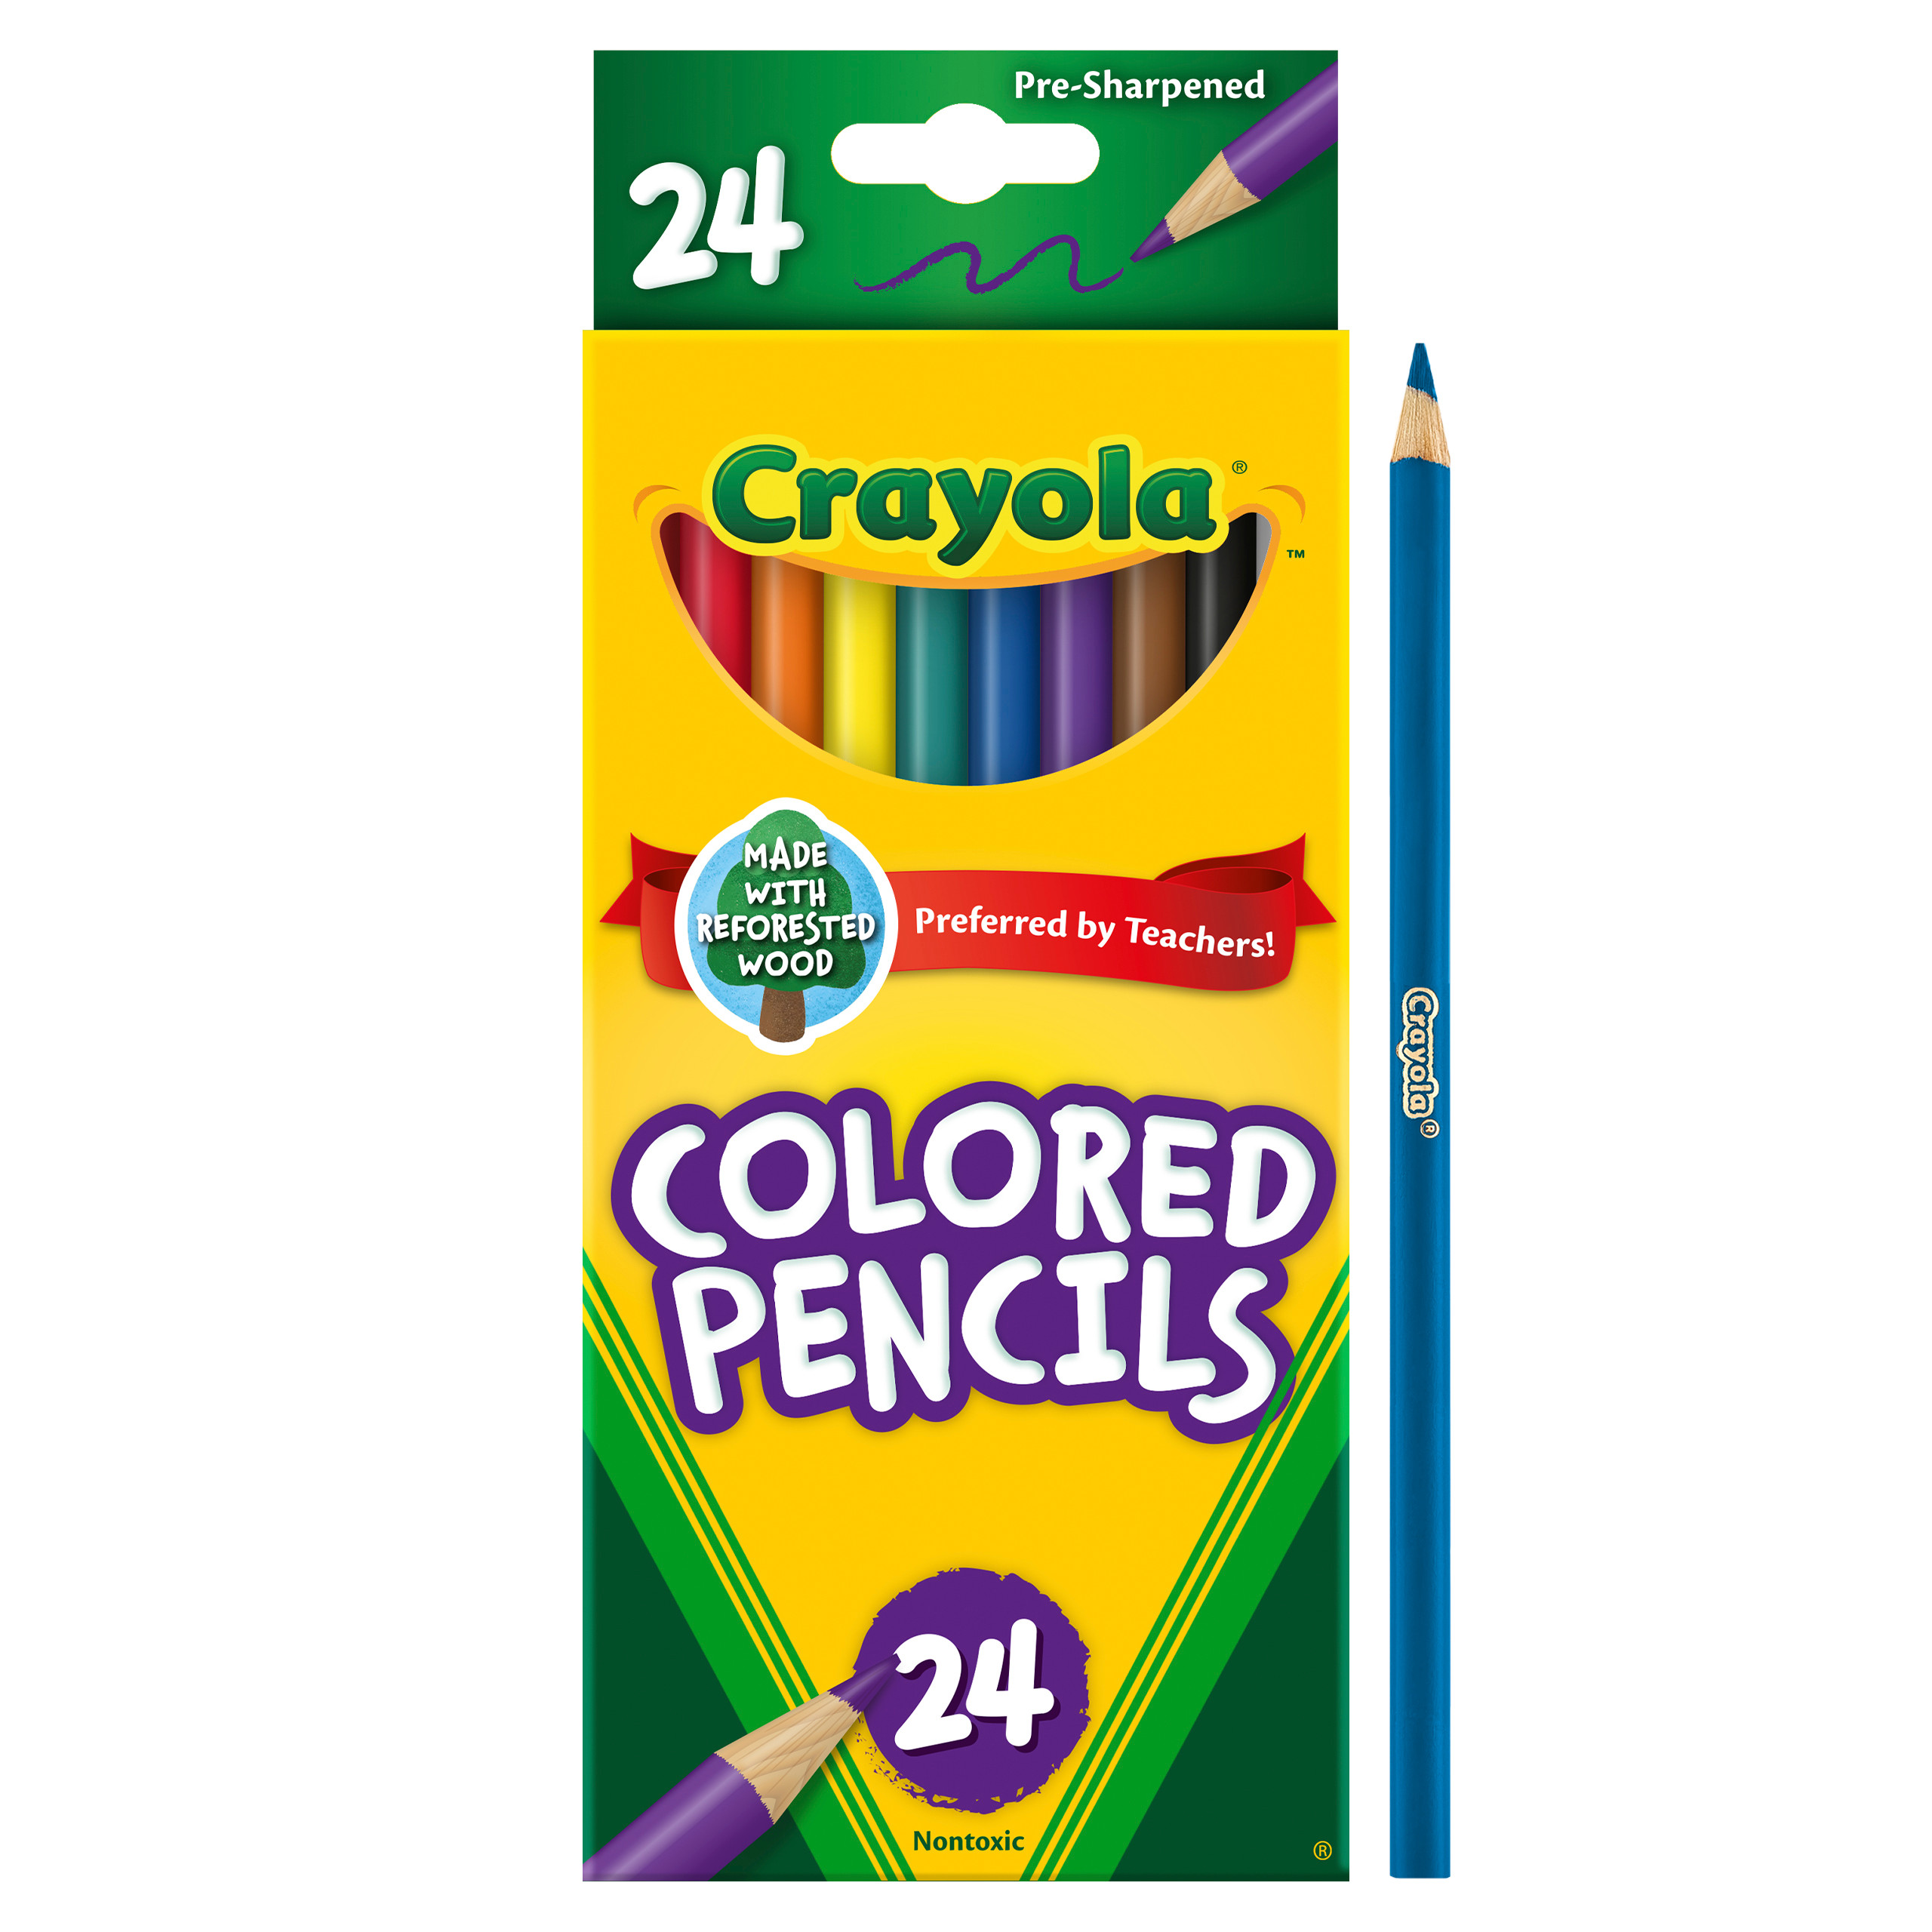 Crayola Colored Pencils, Assorted Colors, Pre-sharpened, Adult Coloring, 24 Count - image 4 of 8